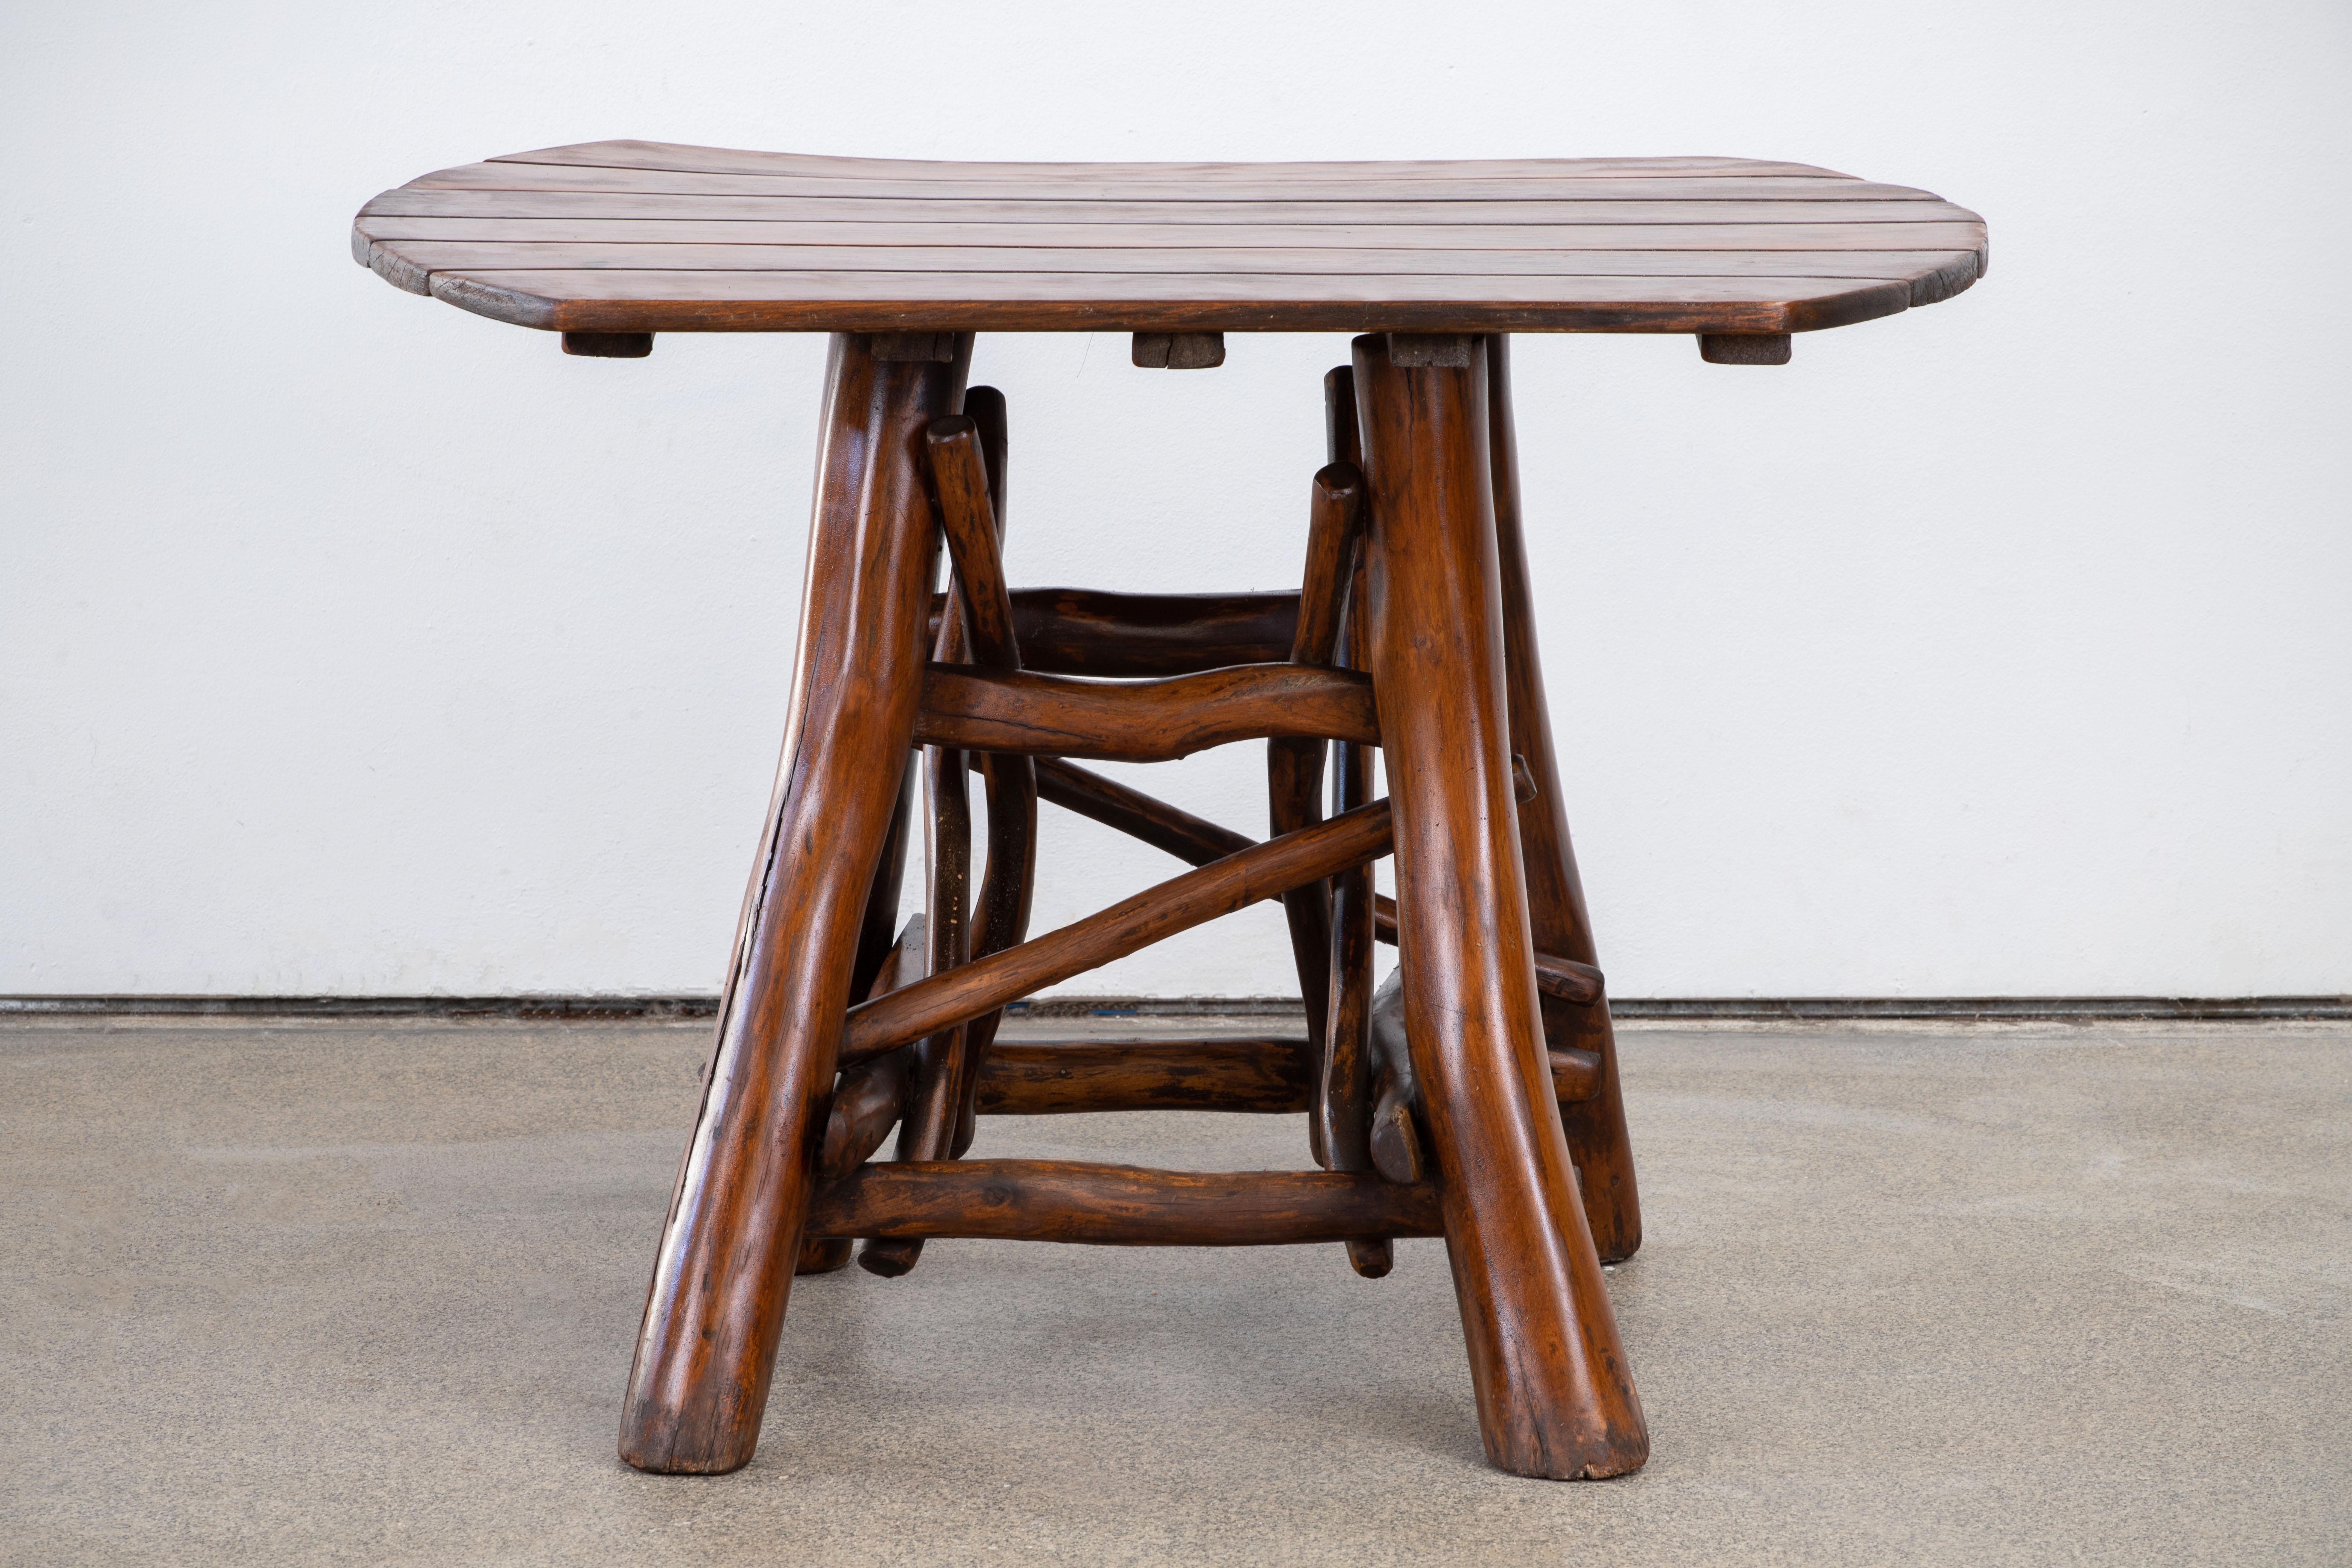 Captivating Brutalist Oak Dining Set - Rustic Charm - 4-Piece Ensemble In Fair Condition For Sale In Wiesbaden, DE